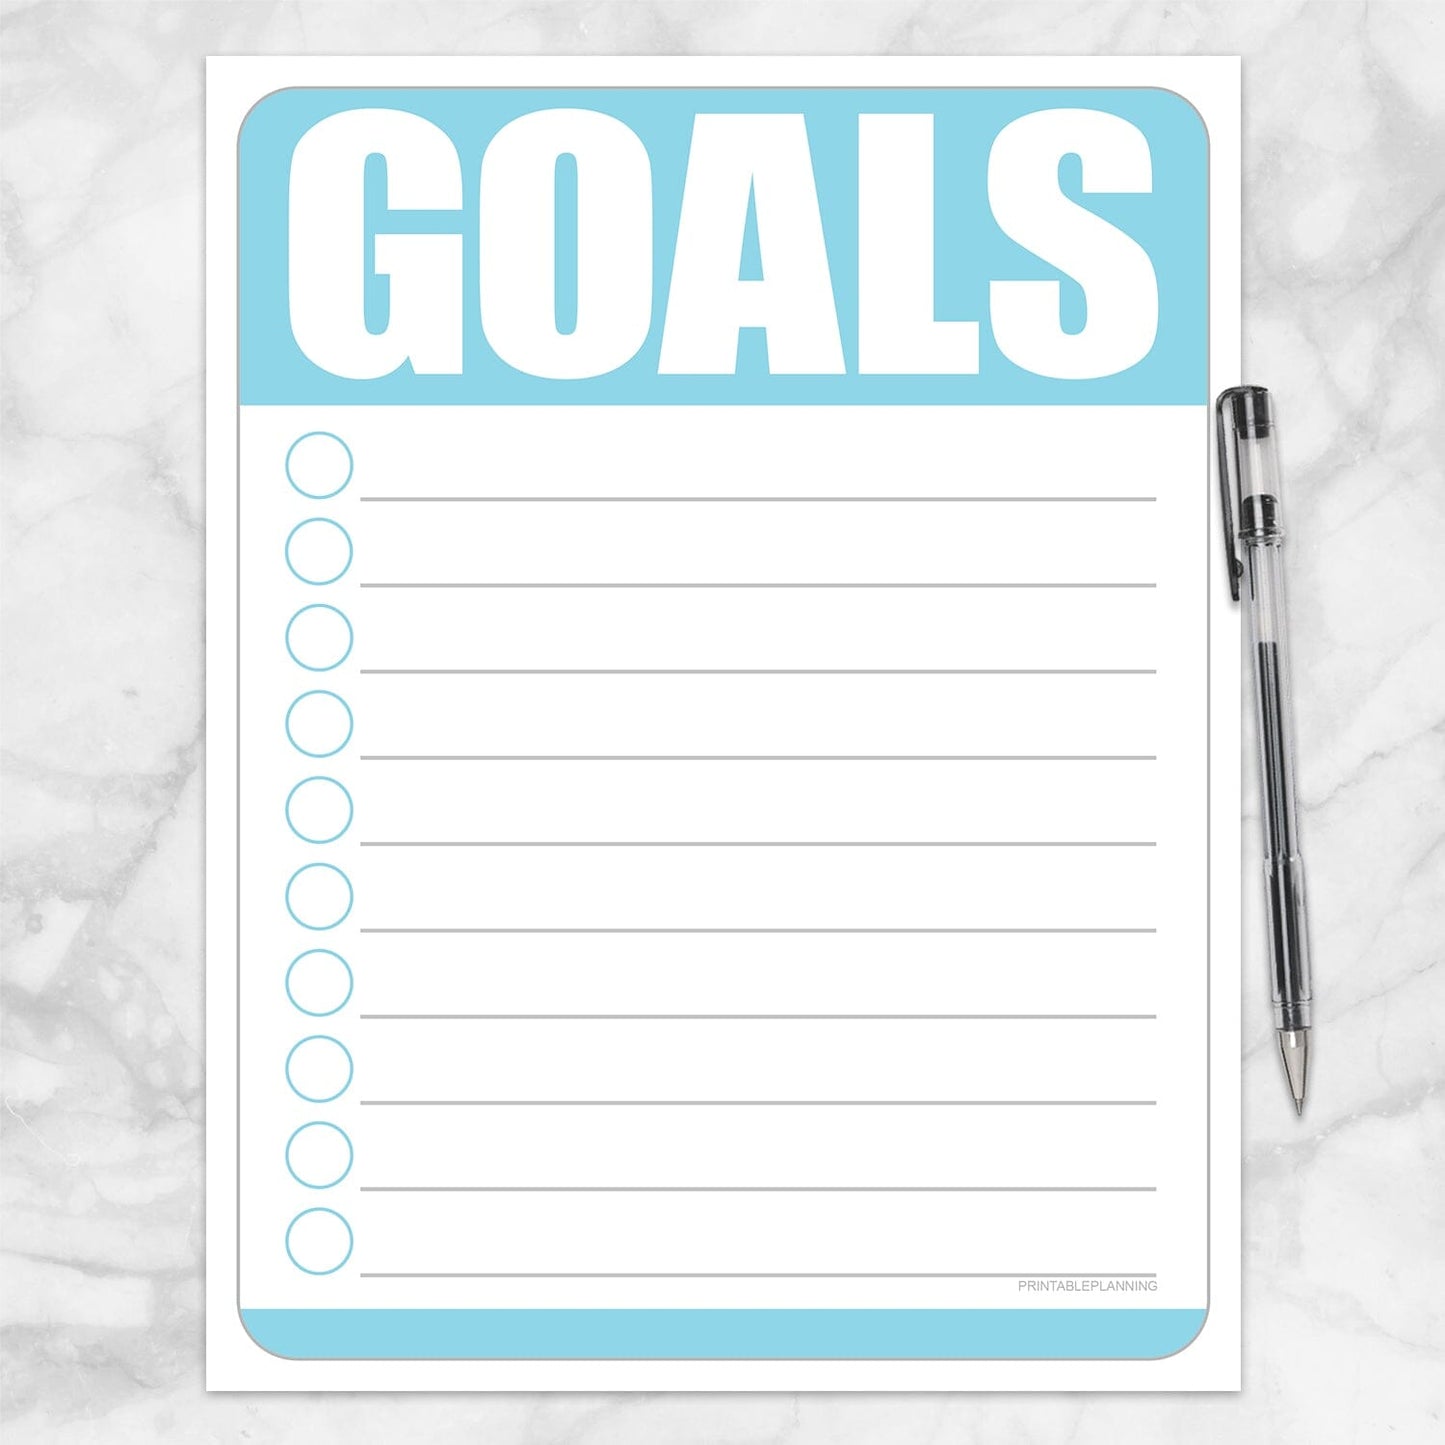 Printable Goals - Blue Full Page Checklist at Printable Planning.